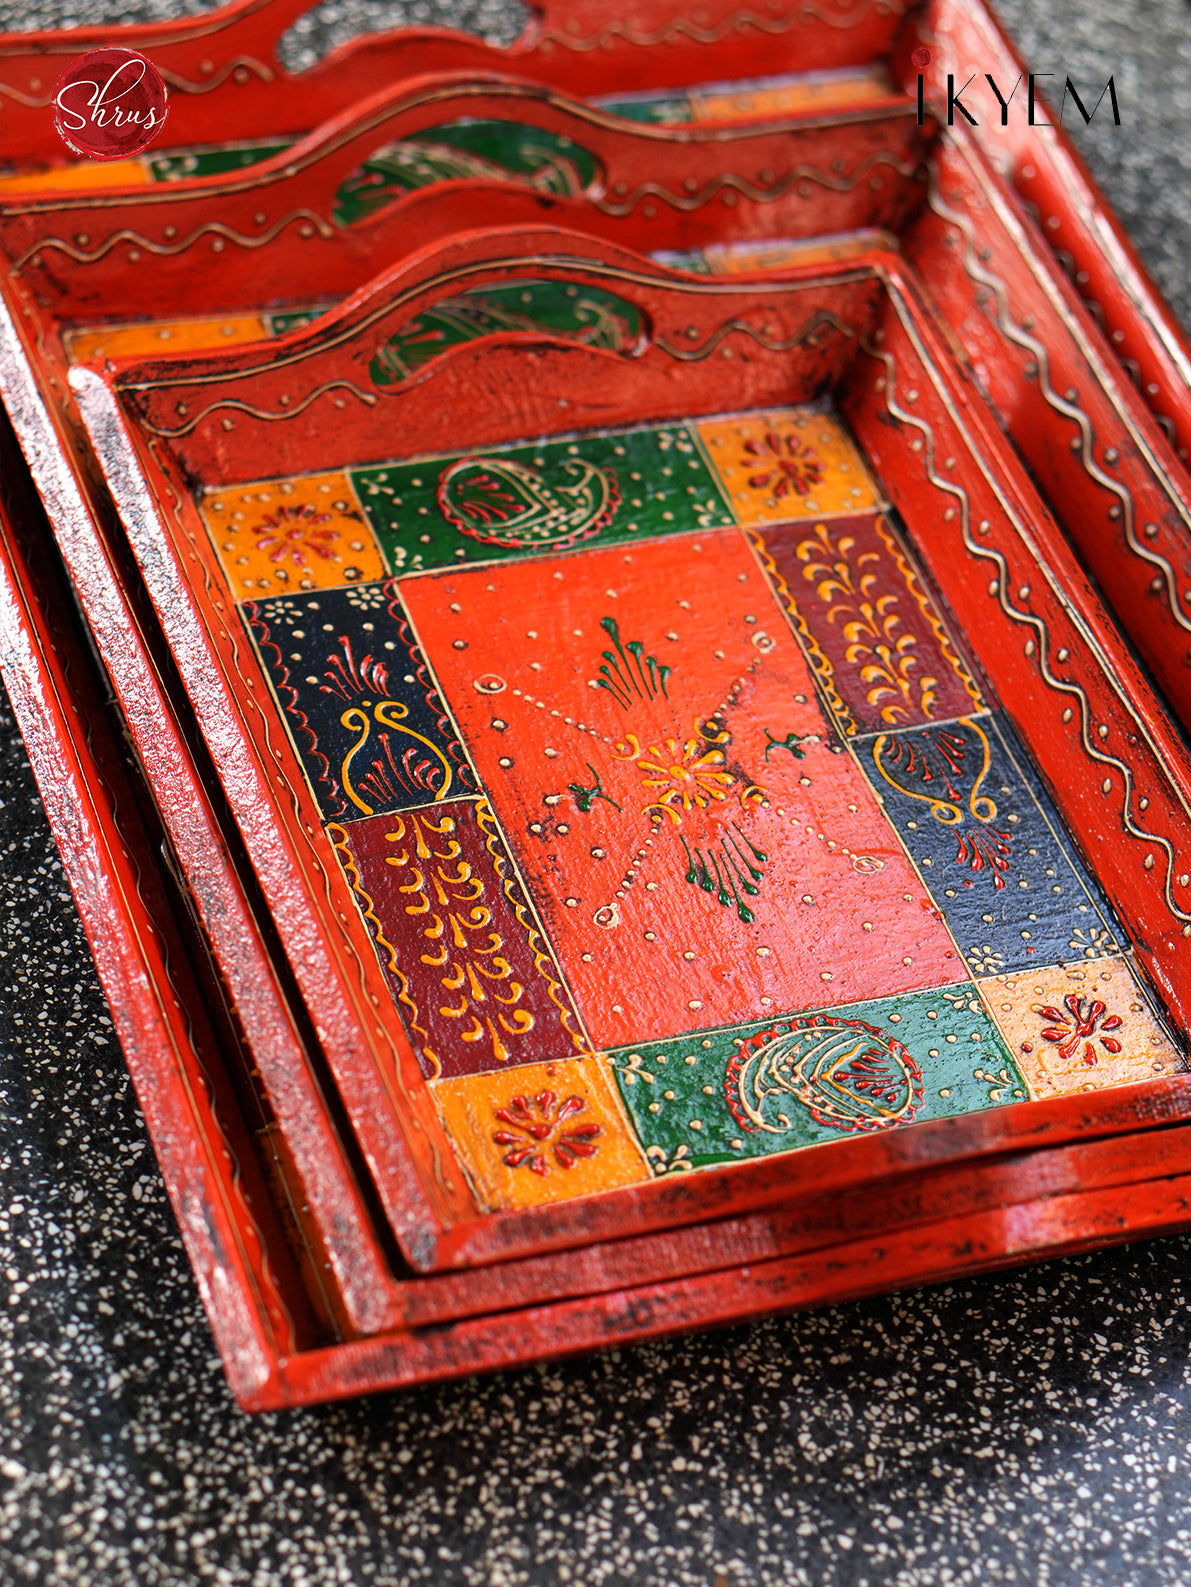 Hand painted wooden trays